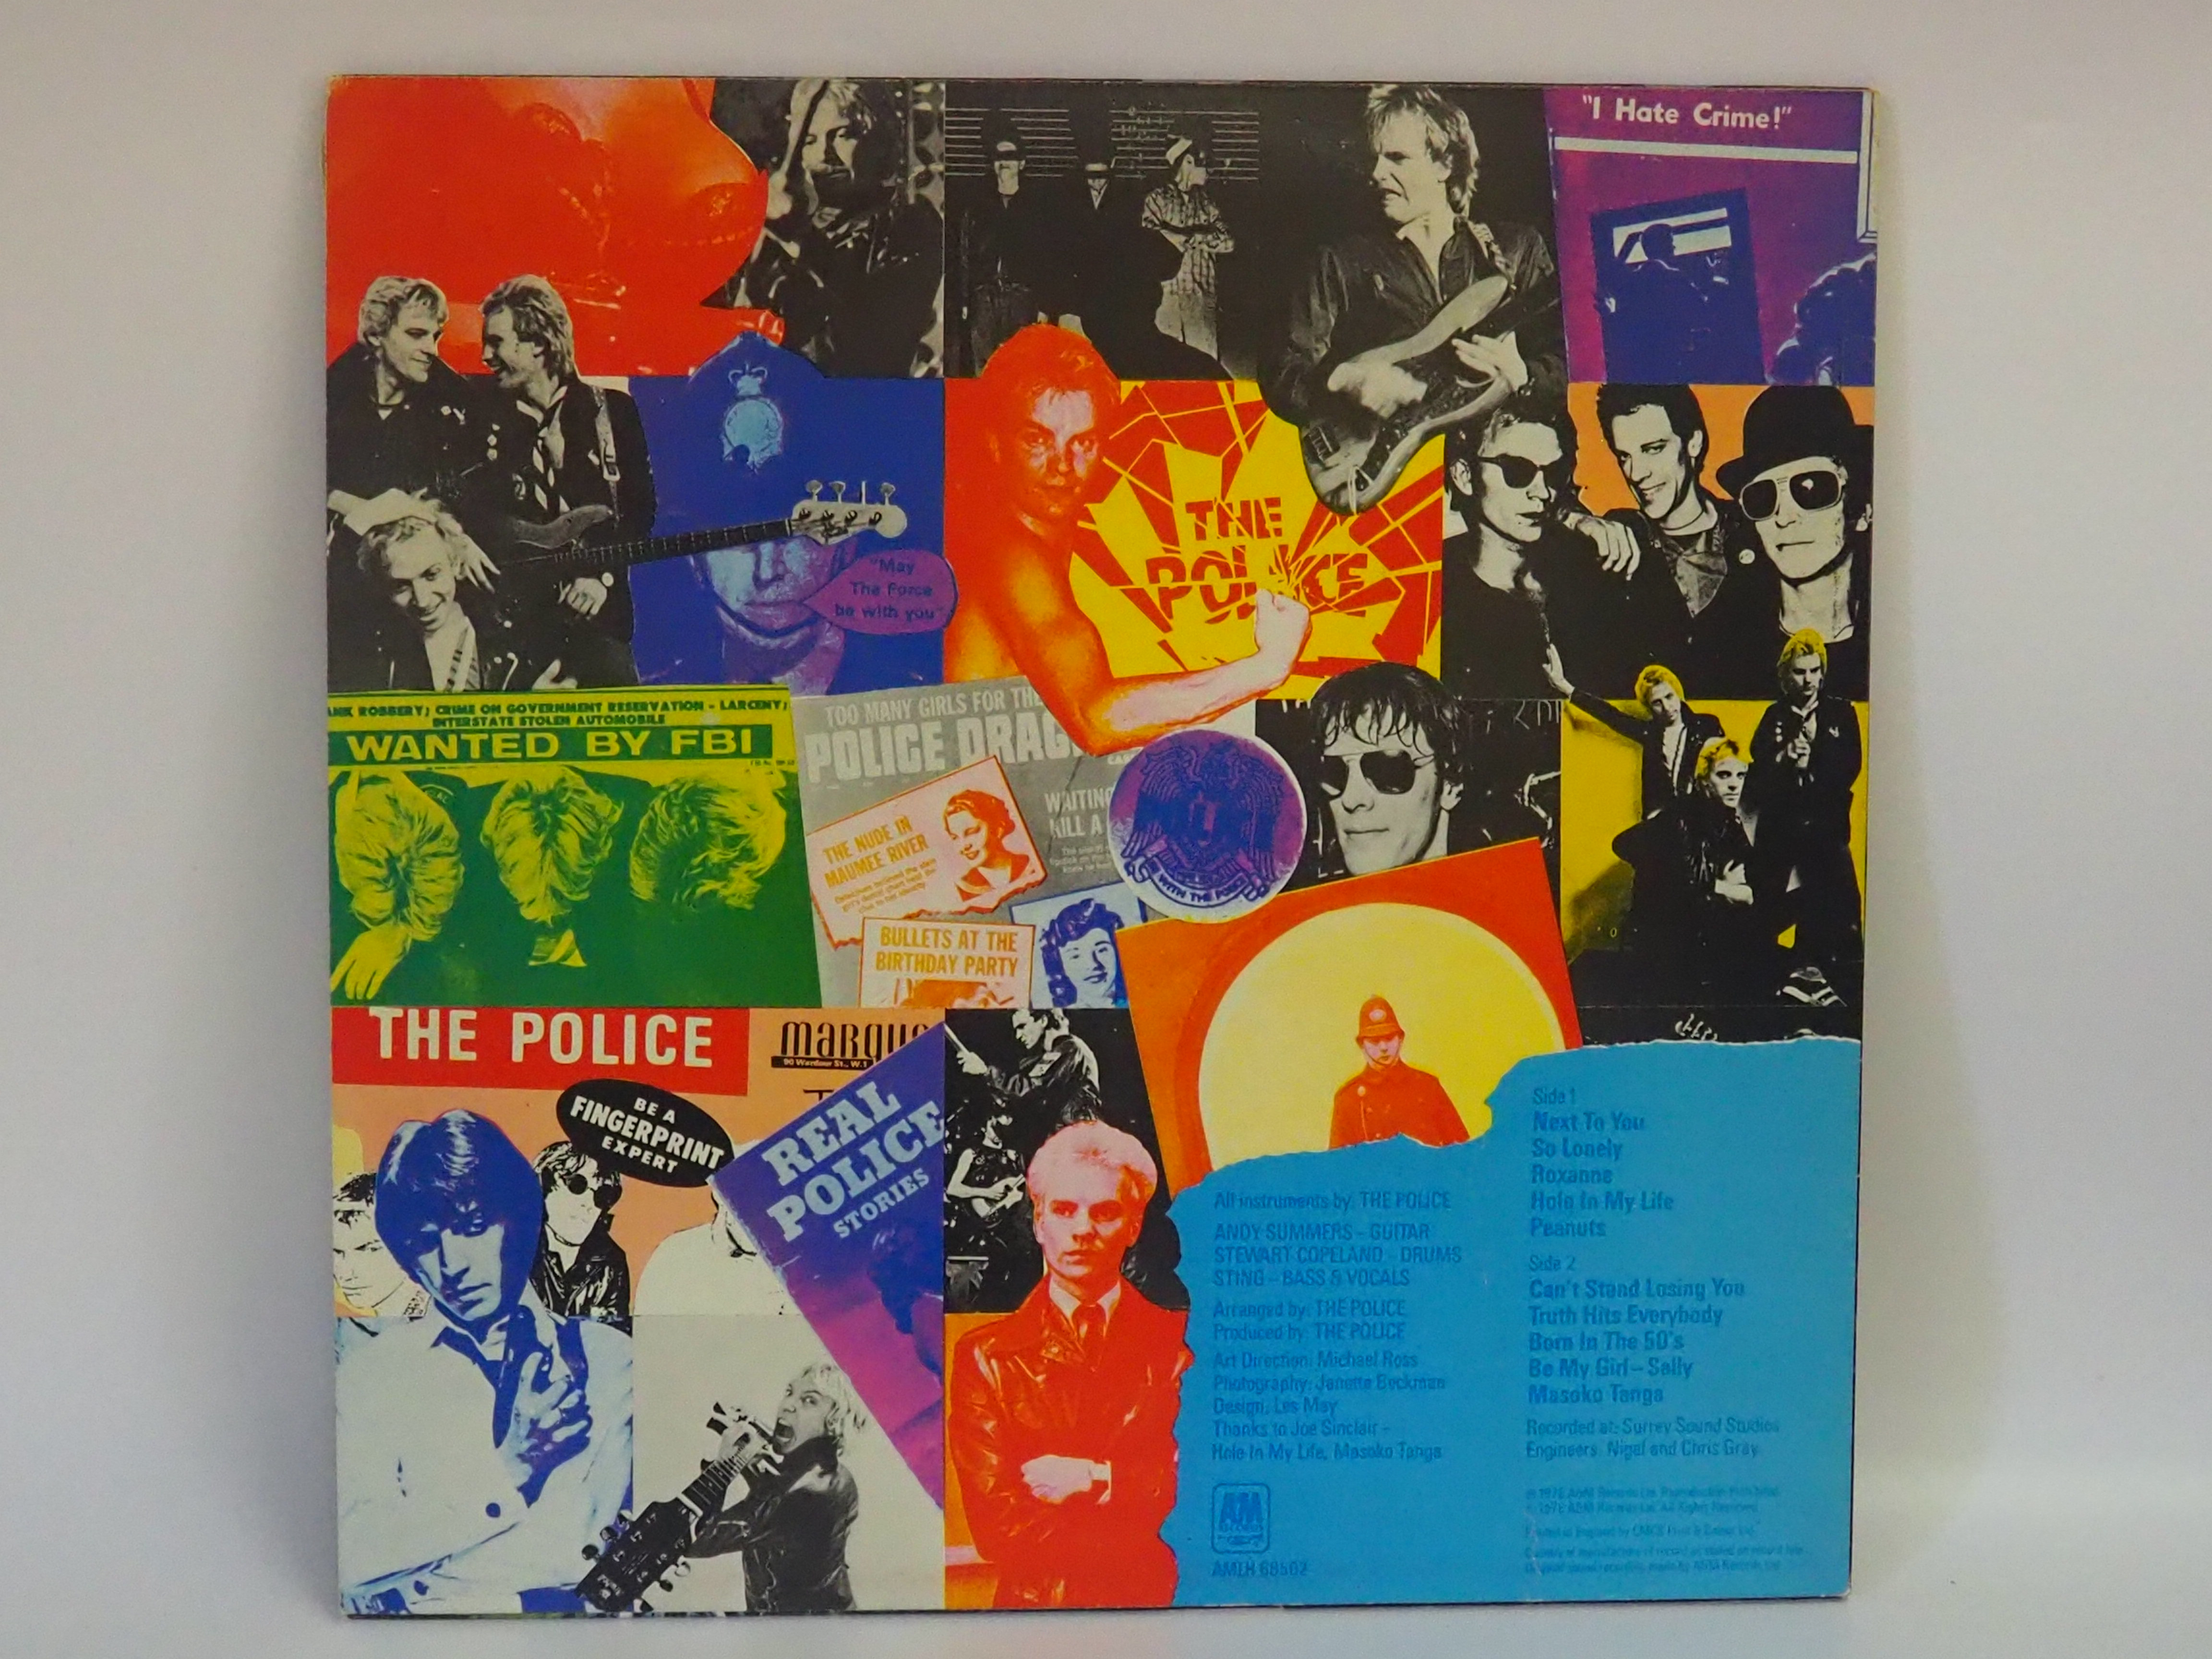 The Police - Outlanders d' Amour 12" Vinyl Album - Image 2 of 2